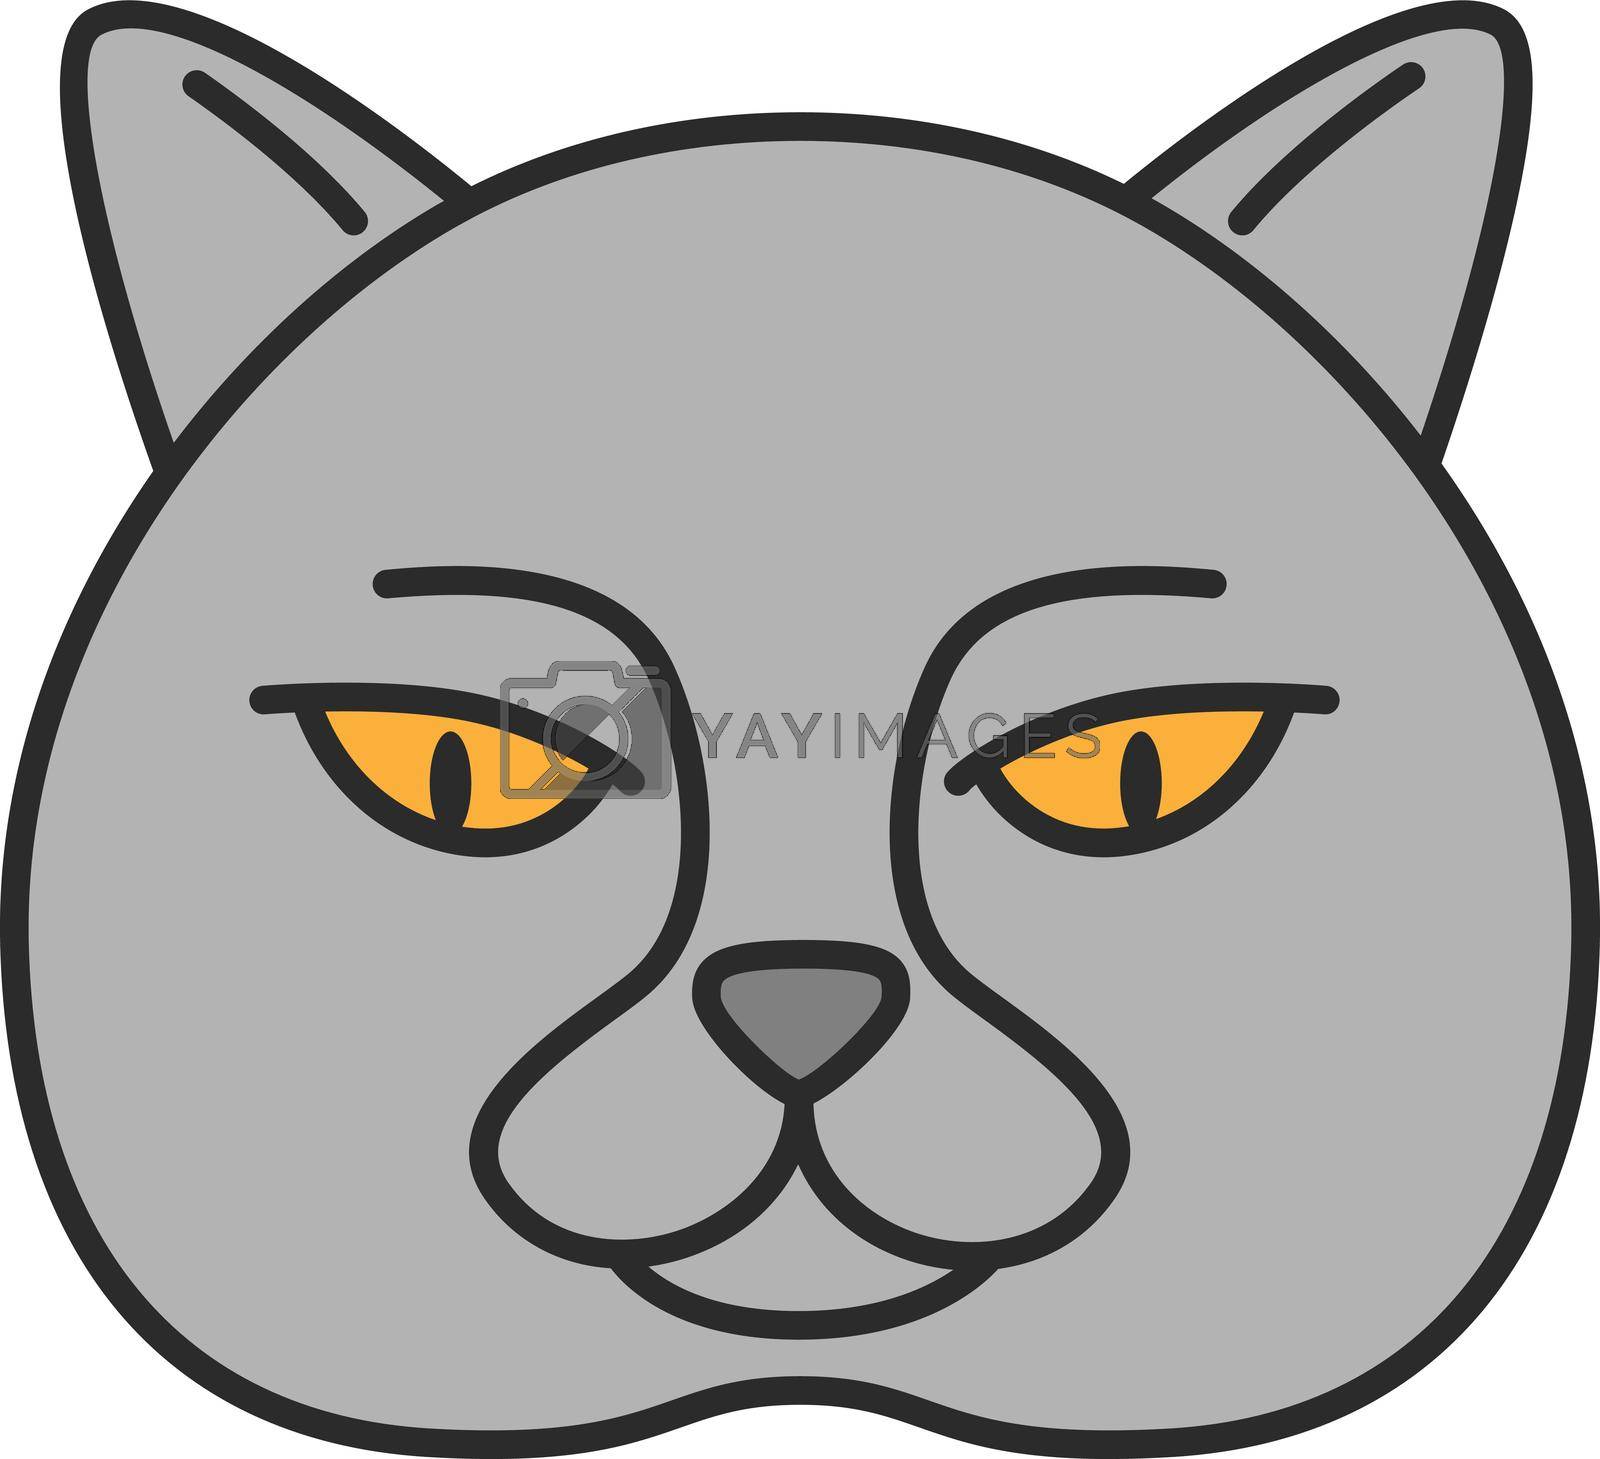 Royalty free image of British shorthair cat color icon by bsd